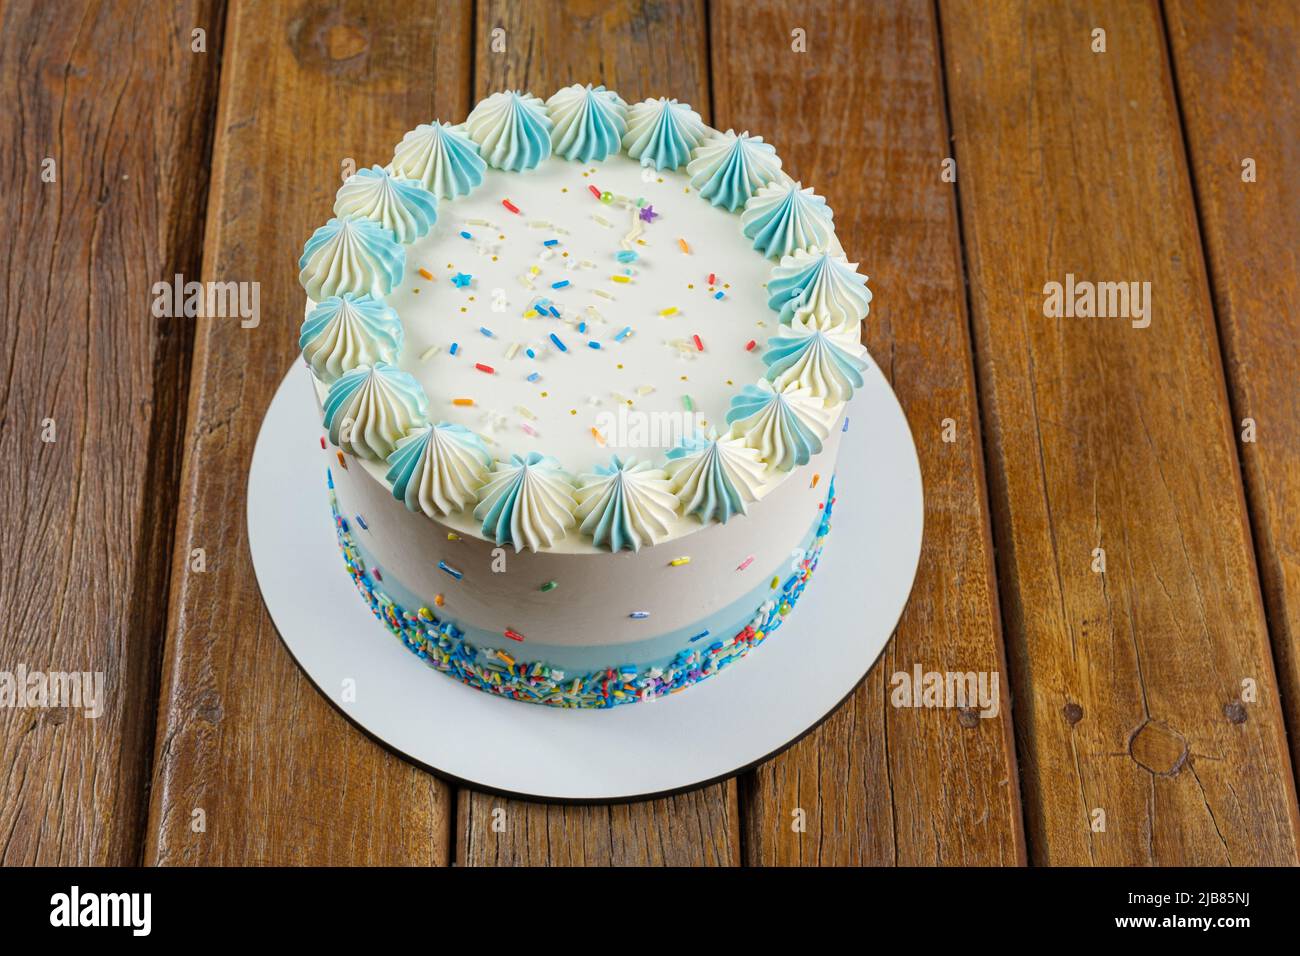 Vanilla cake with butter cream frosting in the shape of zefir top view. Stock Photo